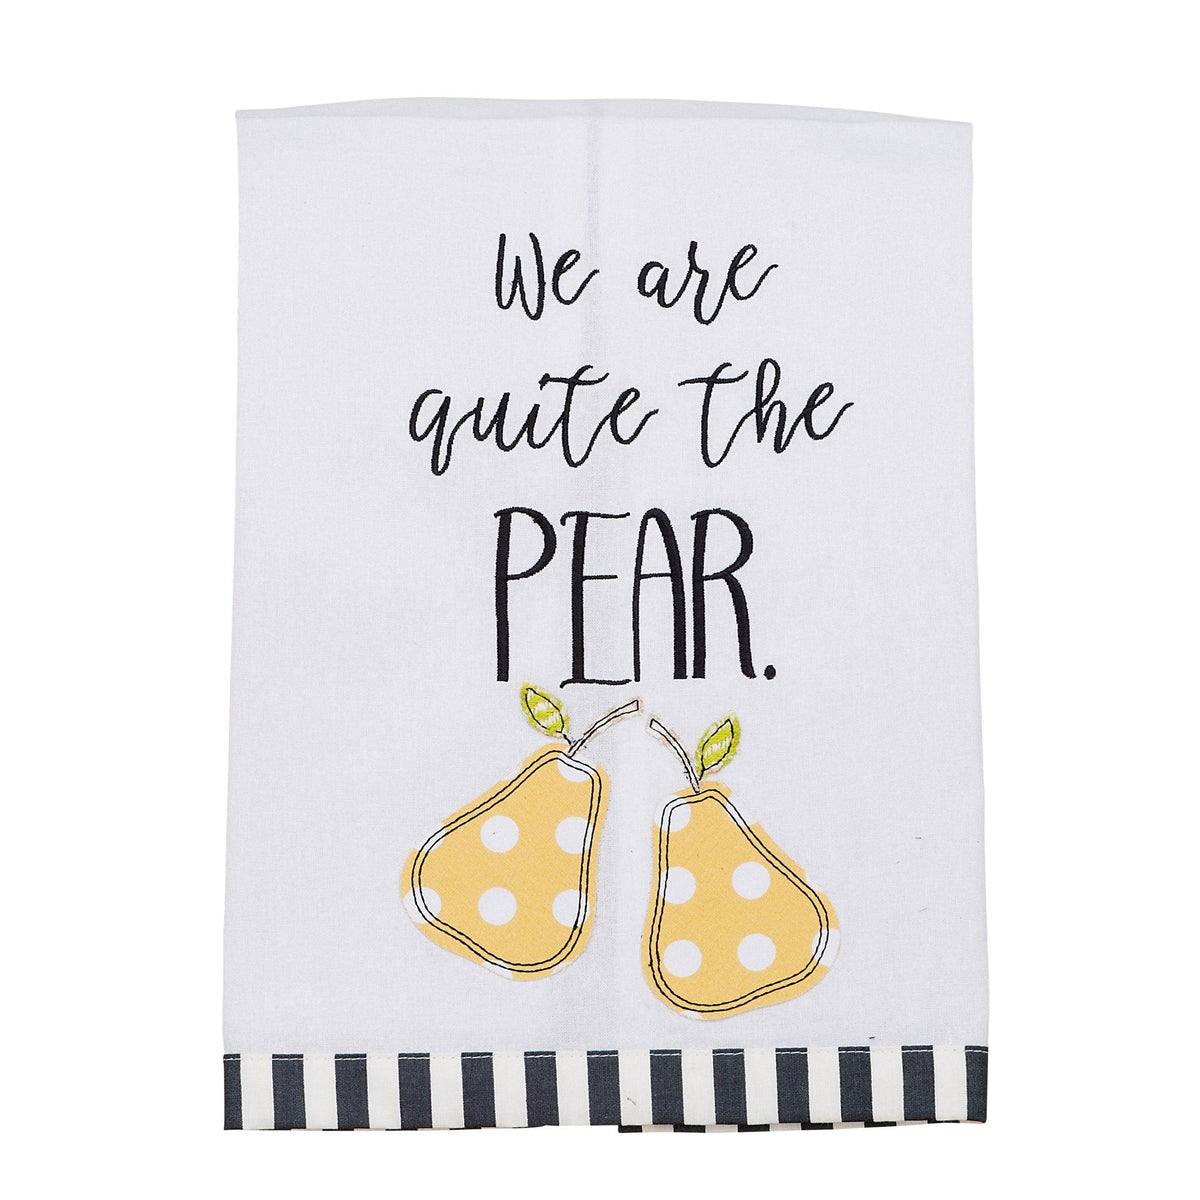 We Are Quite the Pear Tea Towel - GLORY HAUS 